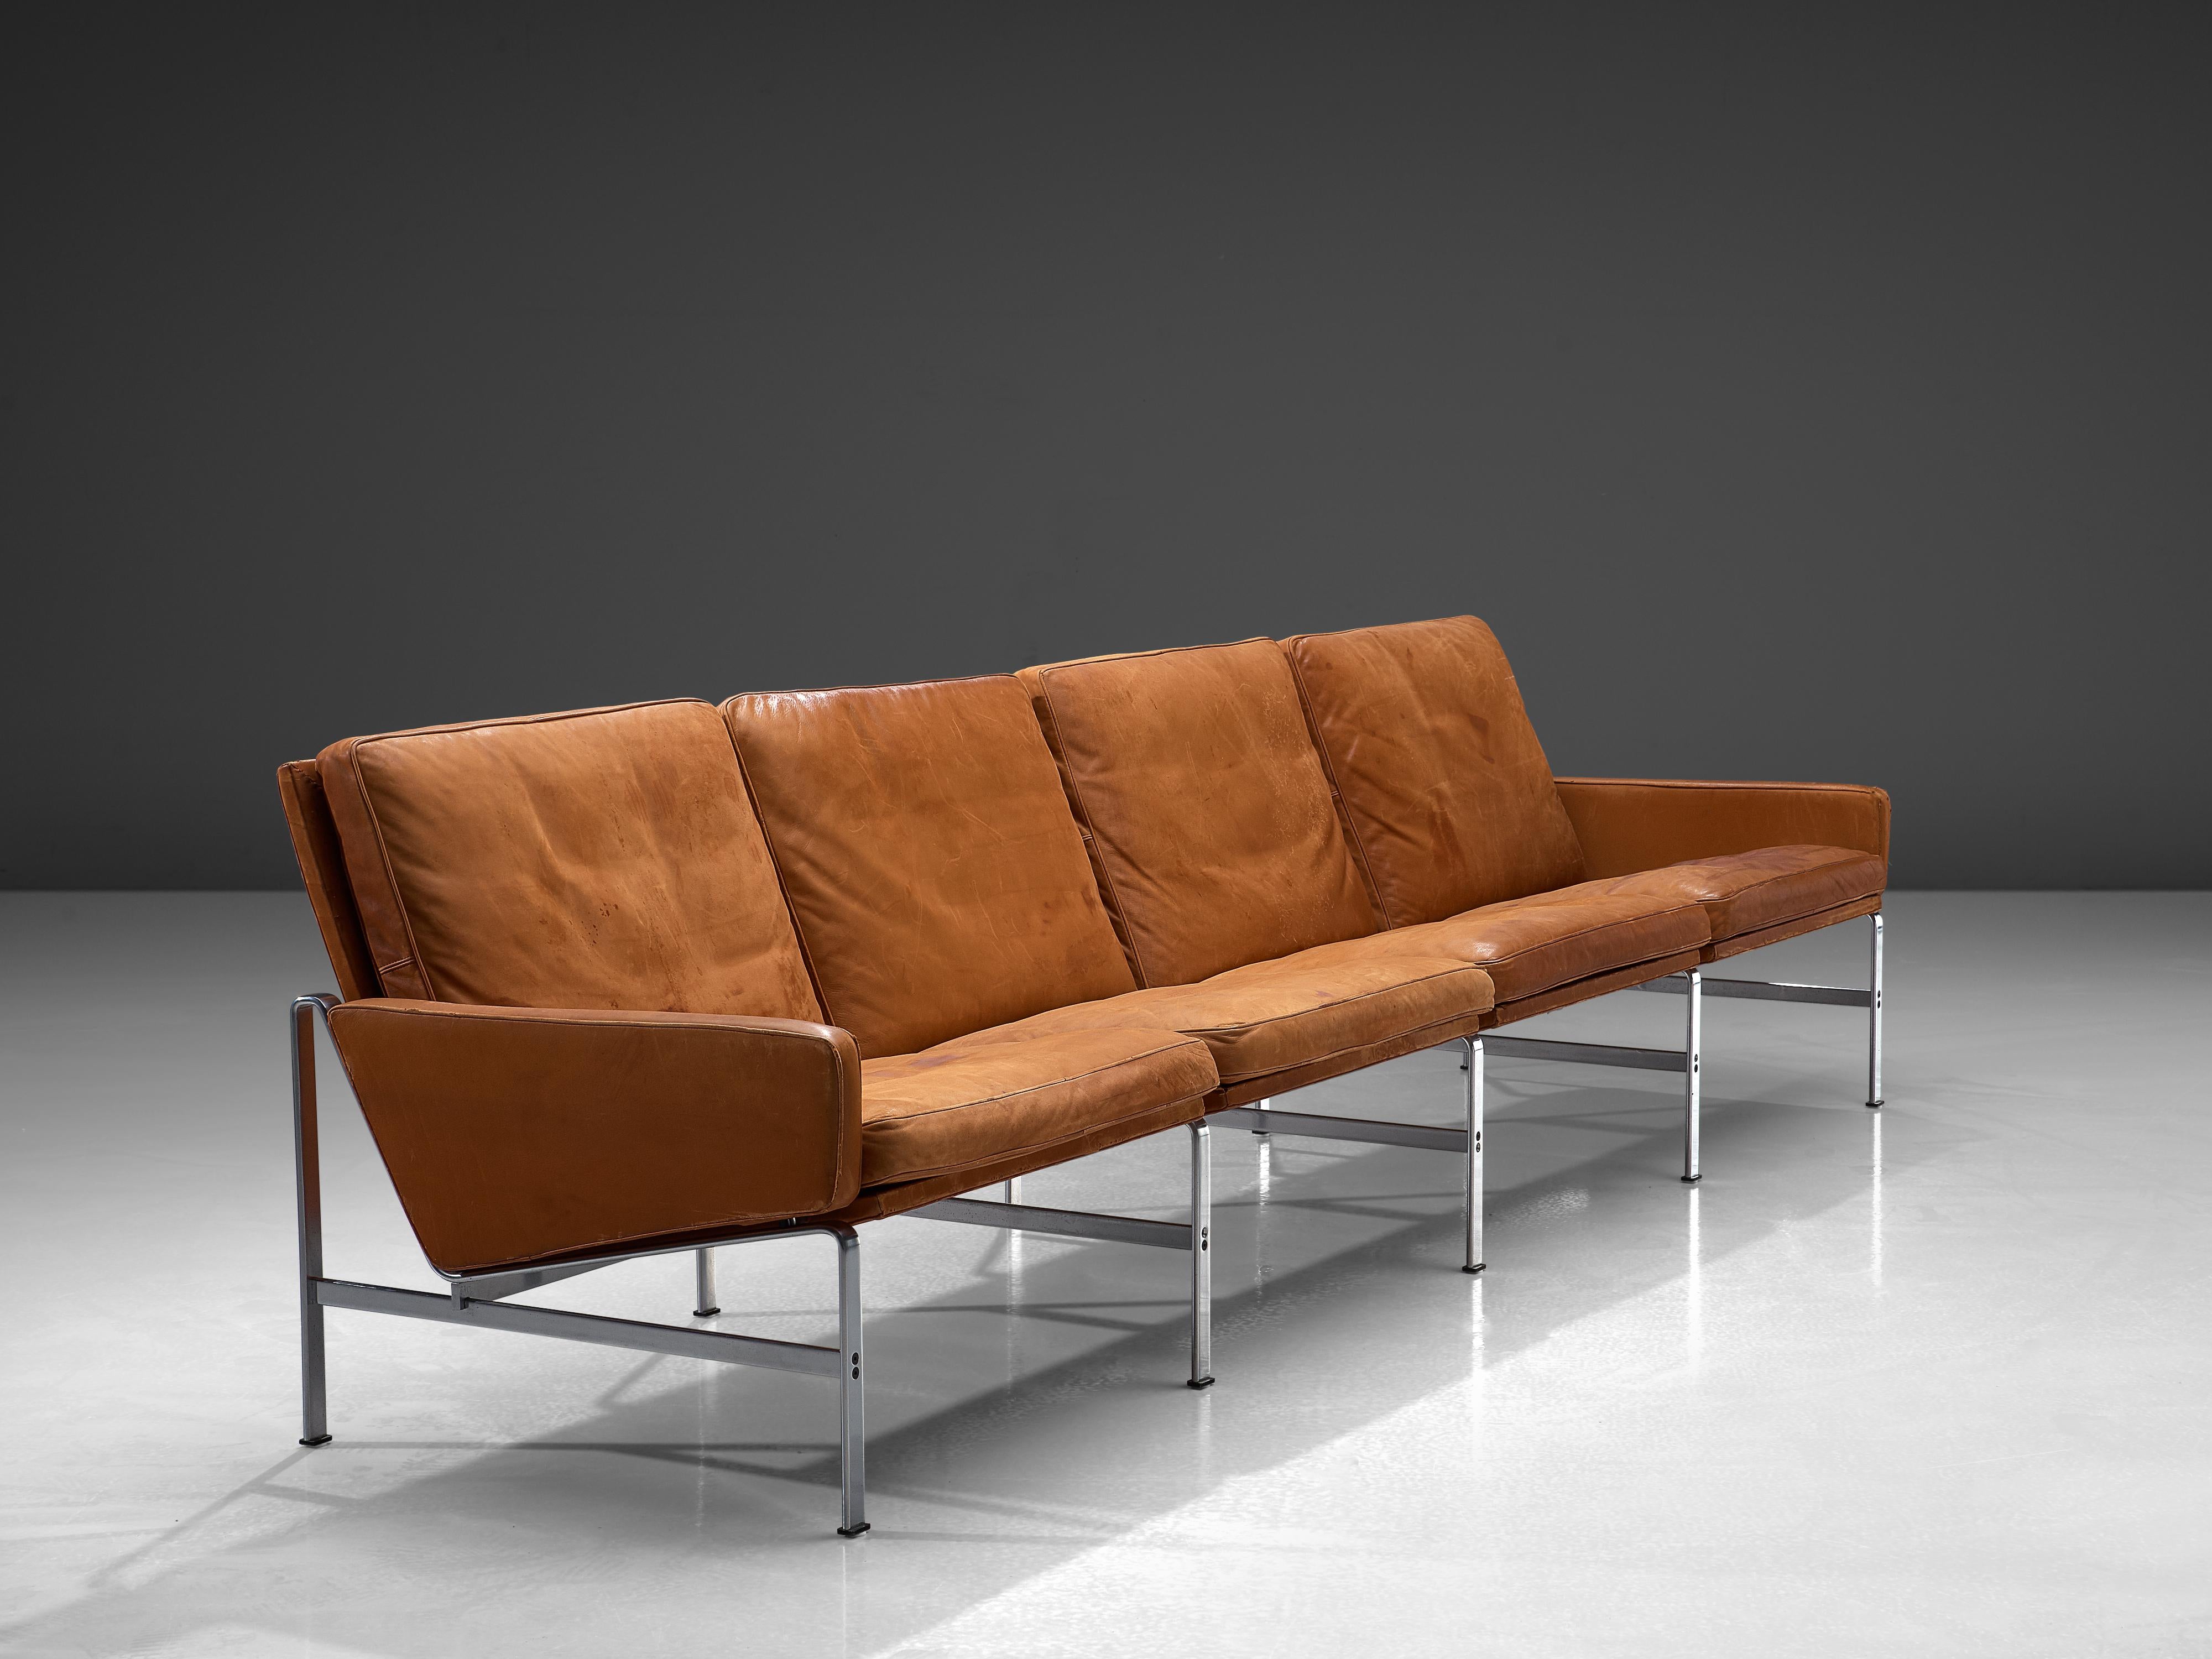 Jørgen Kastholm & Preben Fabricius for Kill International, four-seat sofa, leather, steel, Denmark, 1960s.

Large sofa in patinated cognac leather by Fabricius and Kastholm. The base of this sofa gives a characteristic and open character.